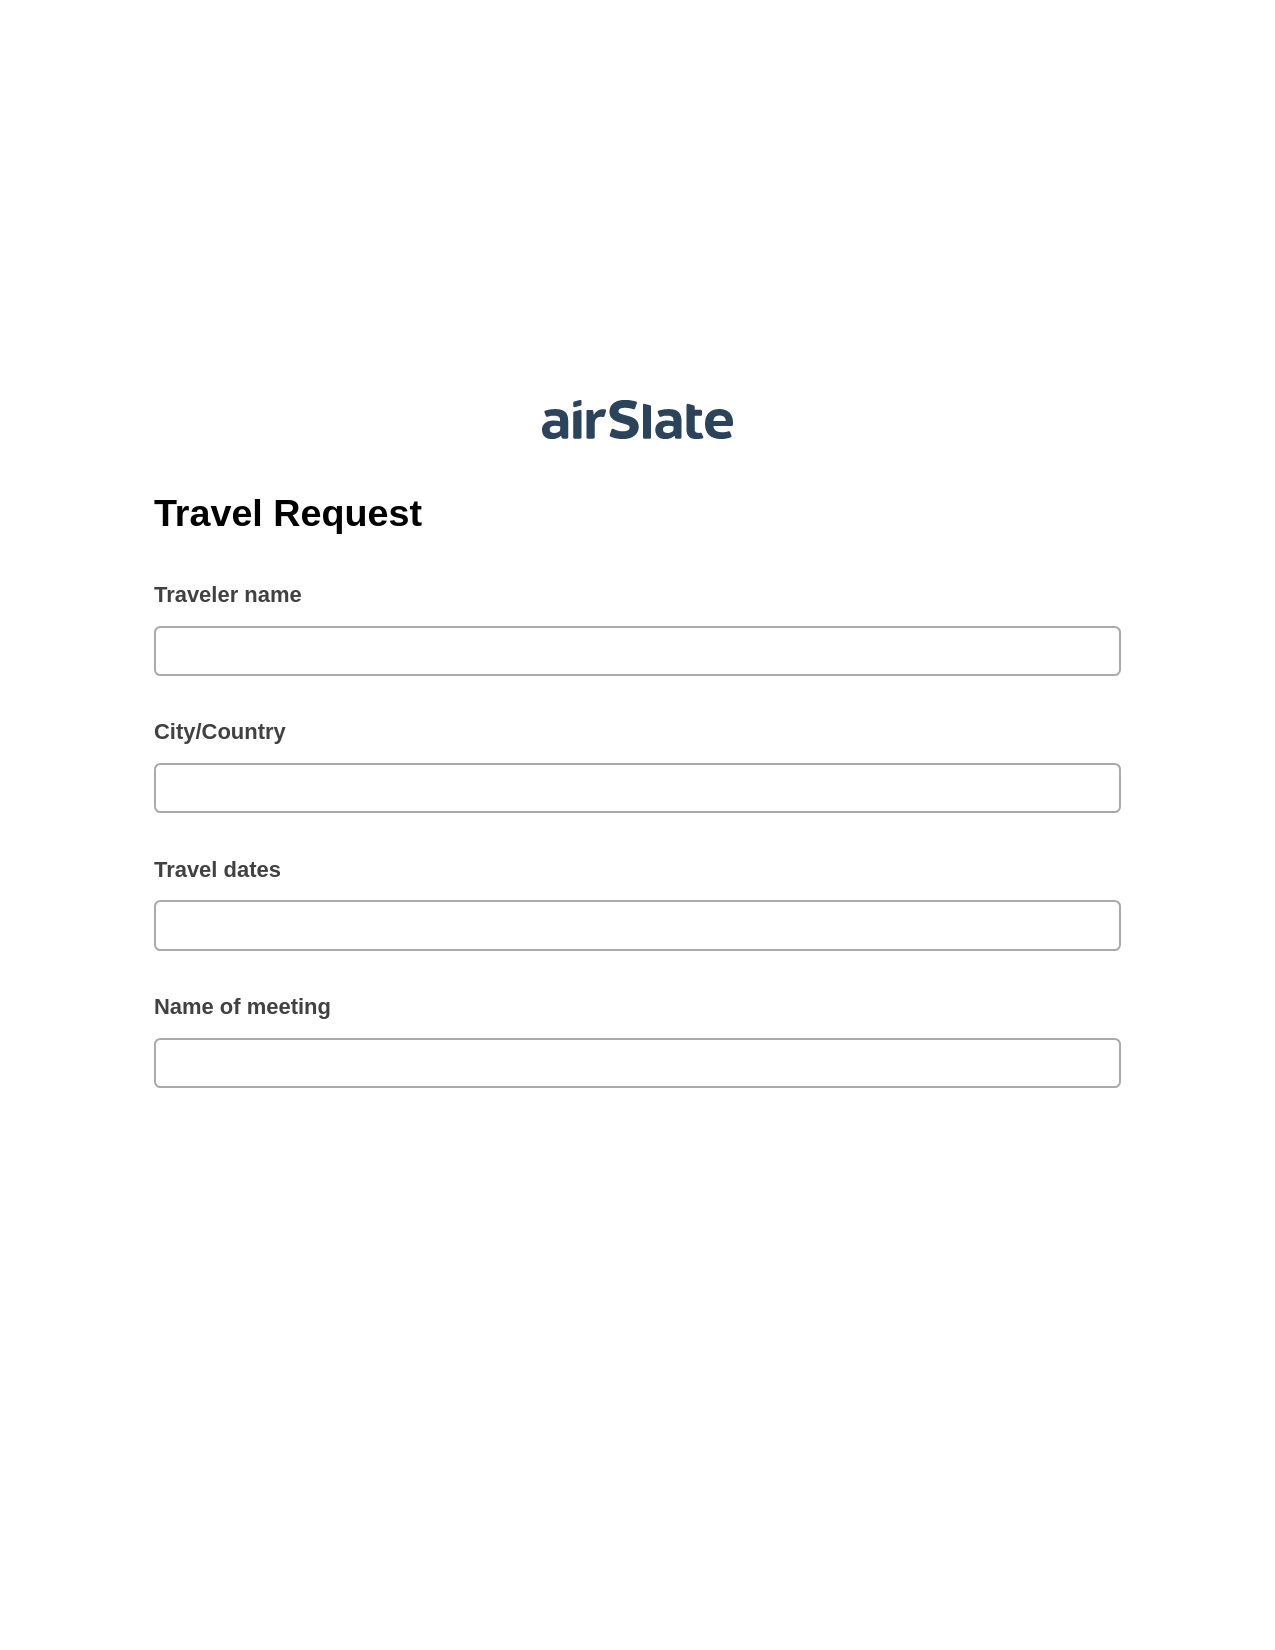 Travel Request Pre-fill Dropdowns from Excel Bot, Lock the slate bot, Export to NetSuite Record Bot